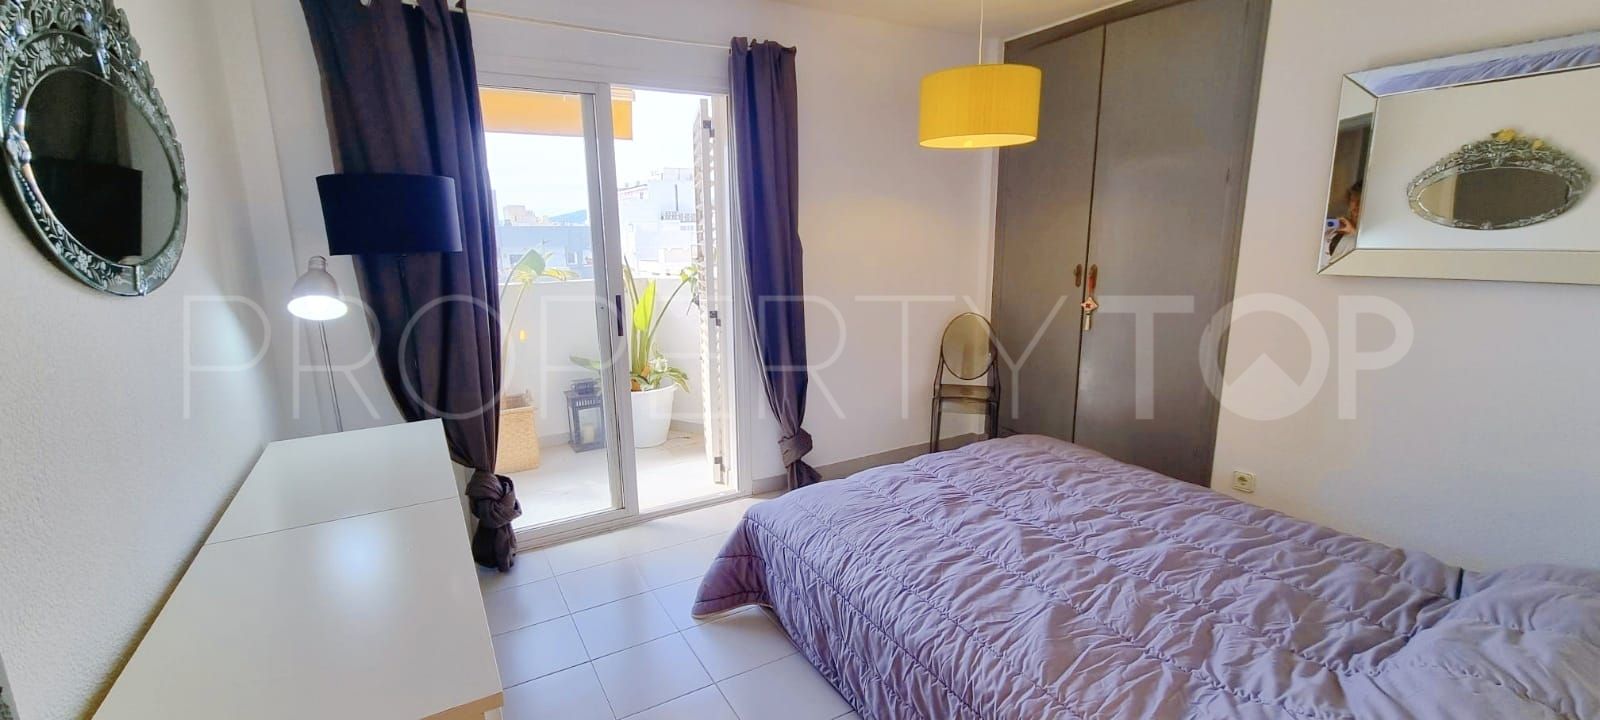 For sale apartment with 2 bedrooms in Centro